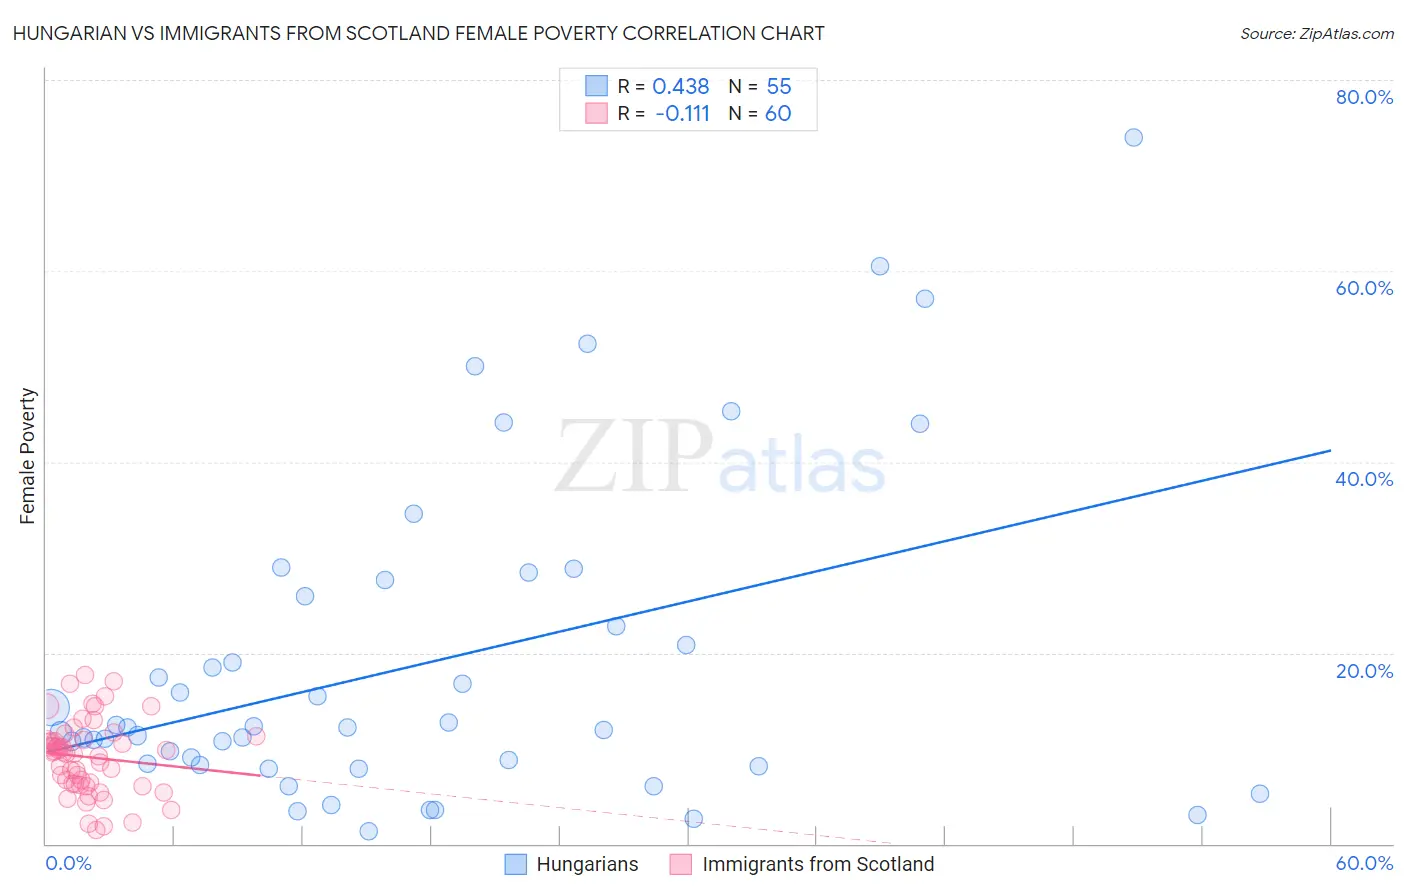 Hungarian vs Immigrants from Scotland Female Poverty